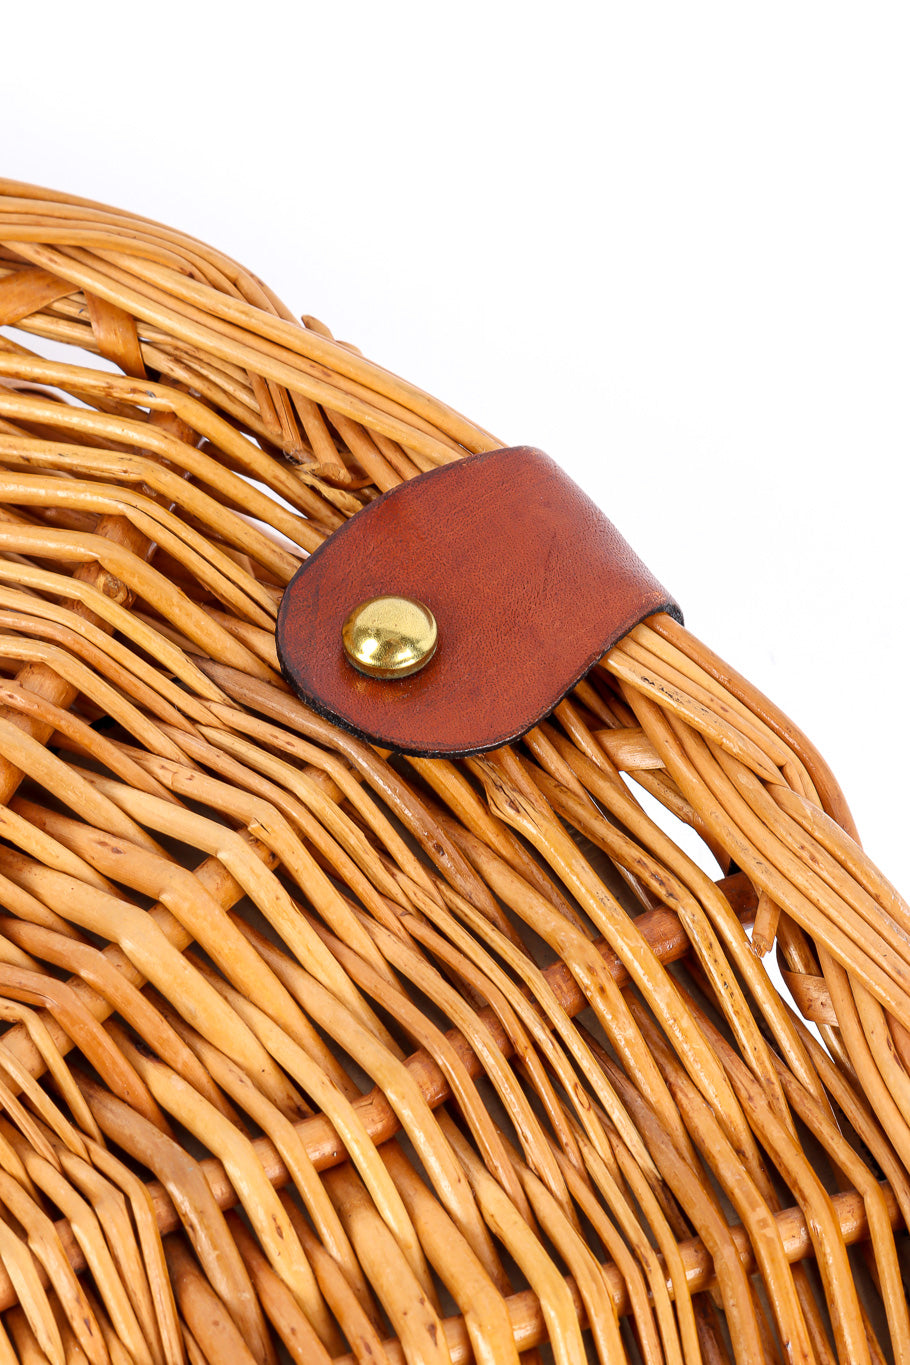 Etienne Aigner rounded wicker purse leather details @recessla